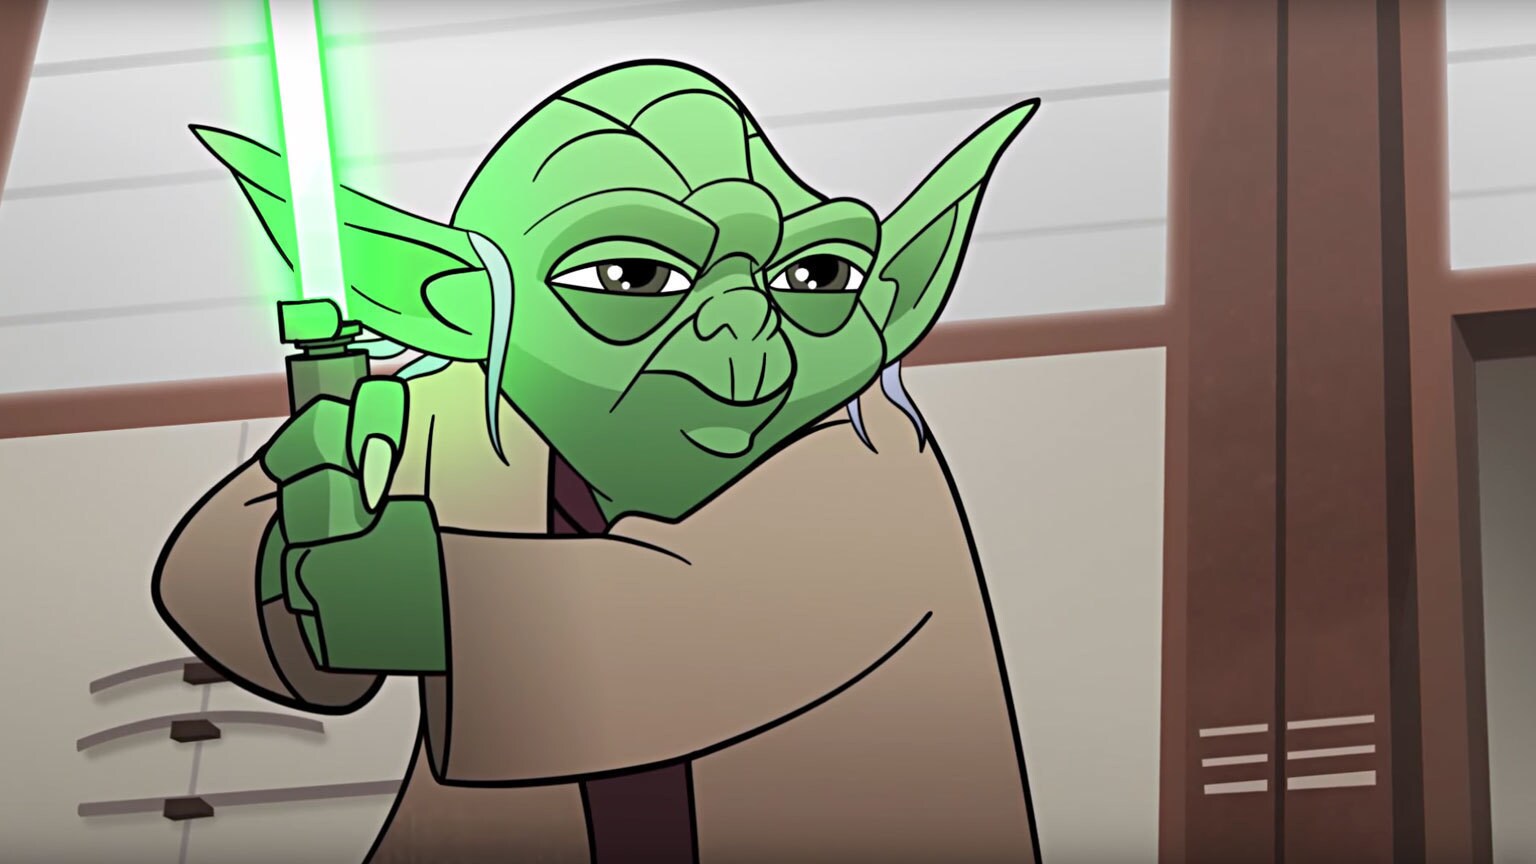 5 Highlights from Star Wars Forces of Destiny: “Teach You, I Will”